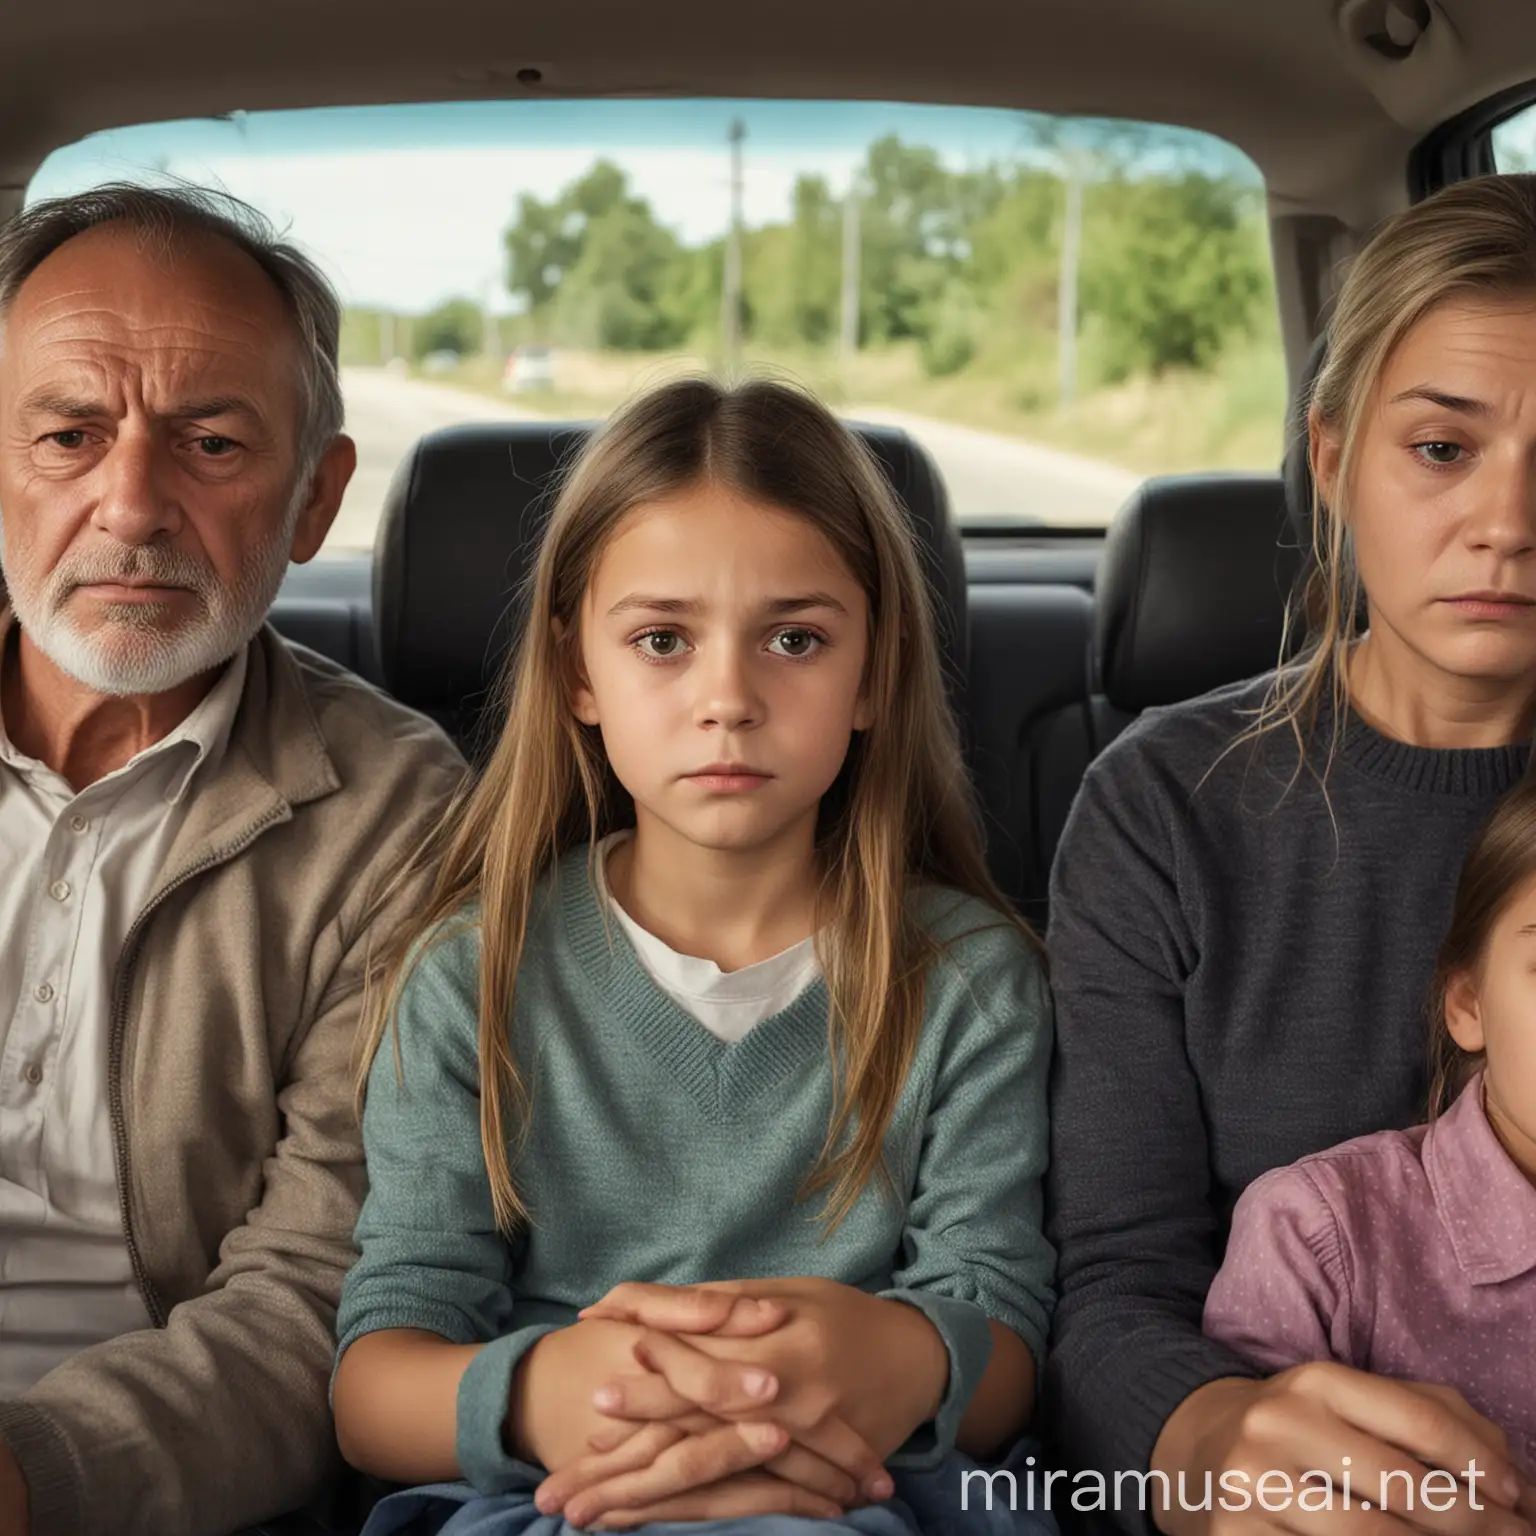 A family is sitting in a car: father, mother, grandfather, grandmother, a 10-year-old girl, and a 12-year-old boy. The girl looks uncomfortable, feels car sick.